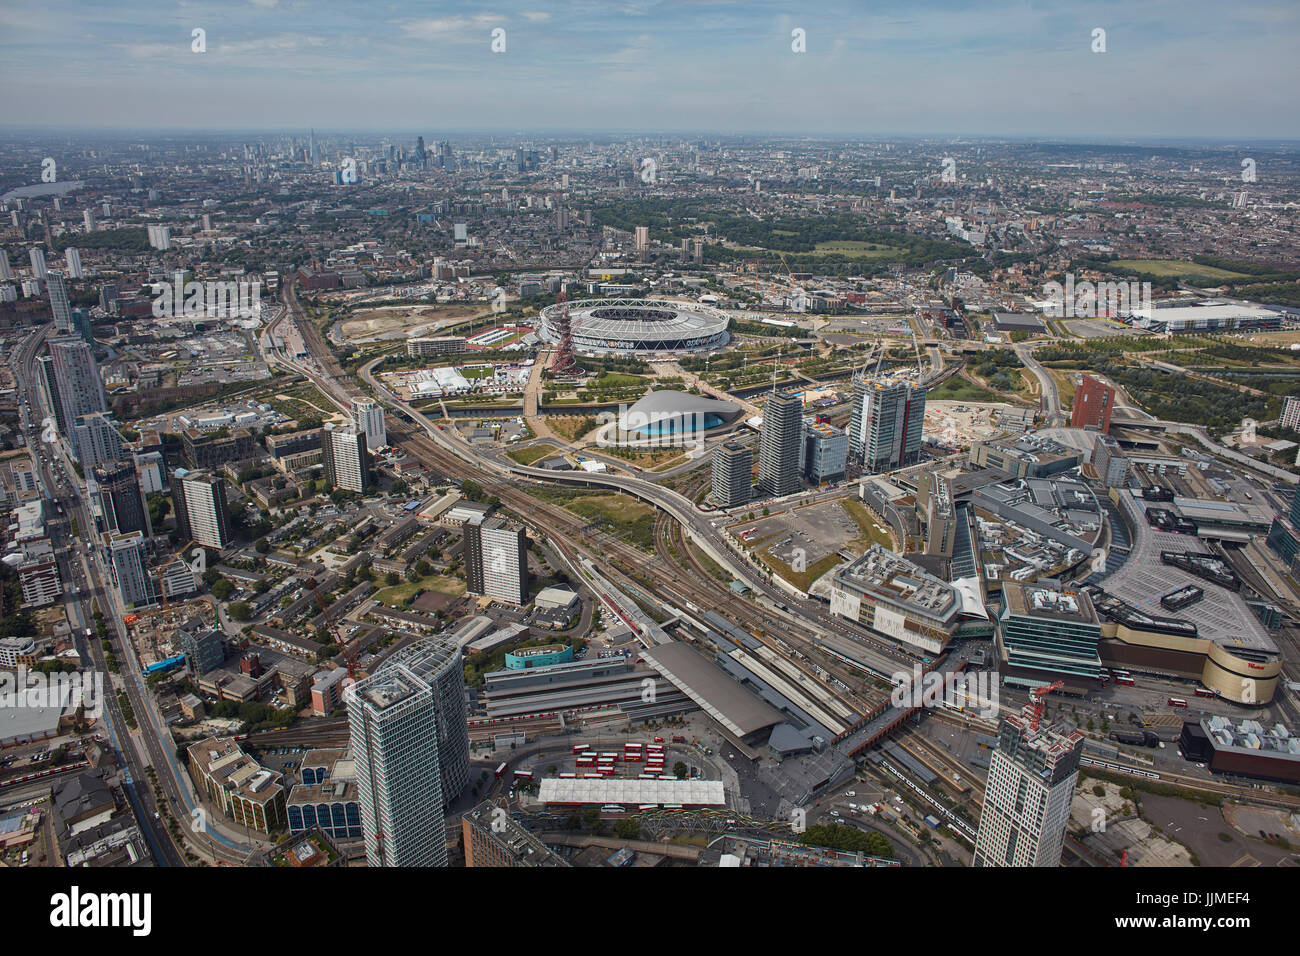 An aerial view of the Queen Elizabeth Olympic Park, Stratford, London Stock Photo